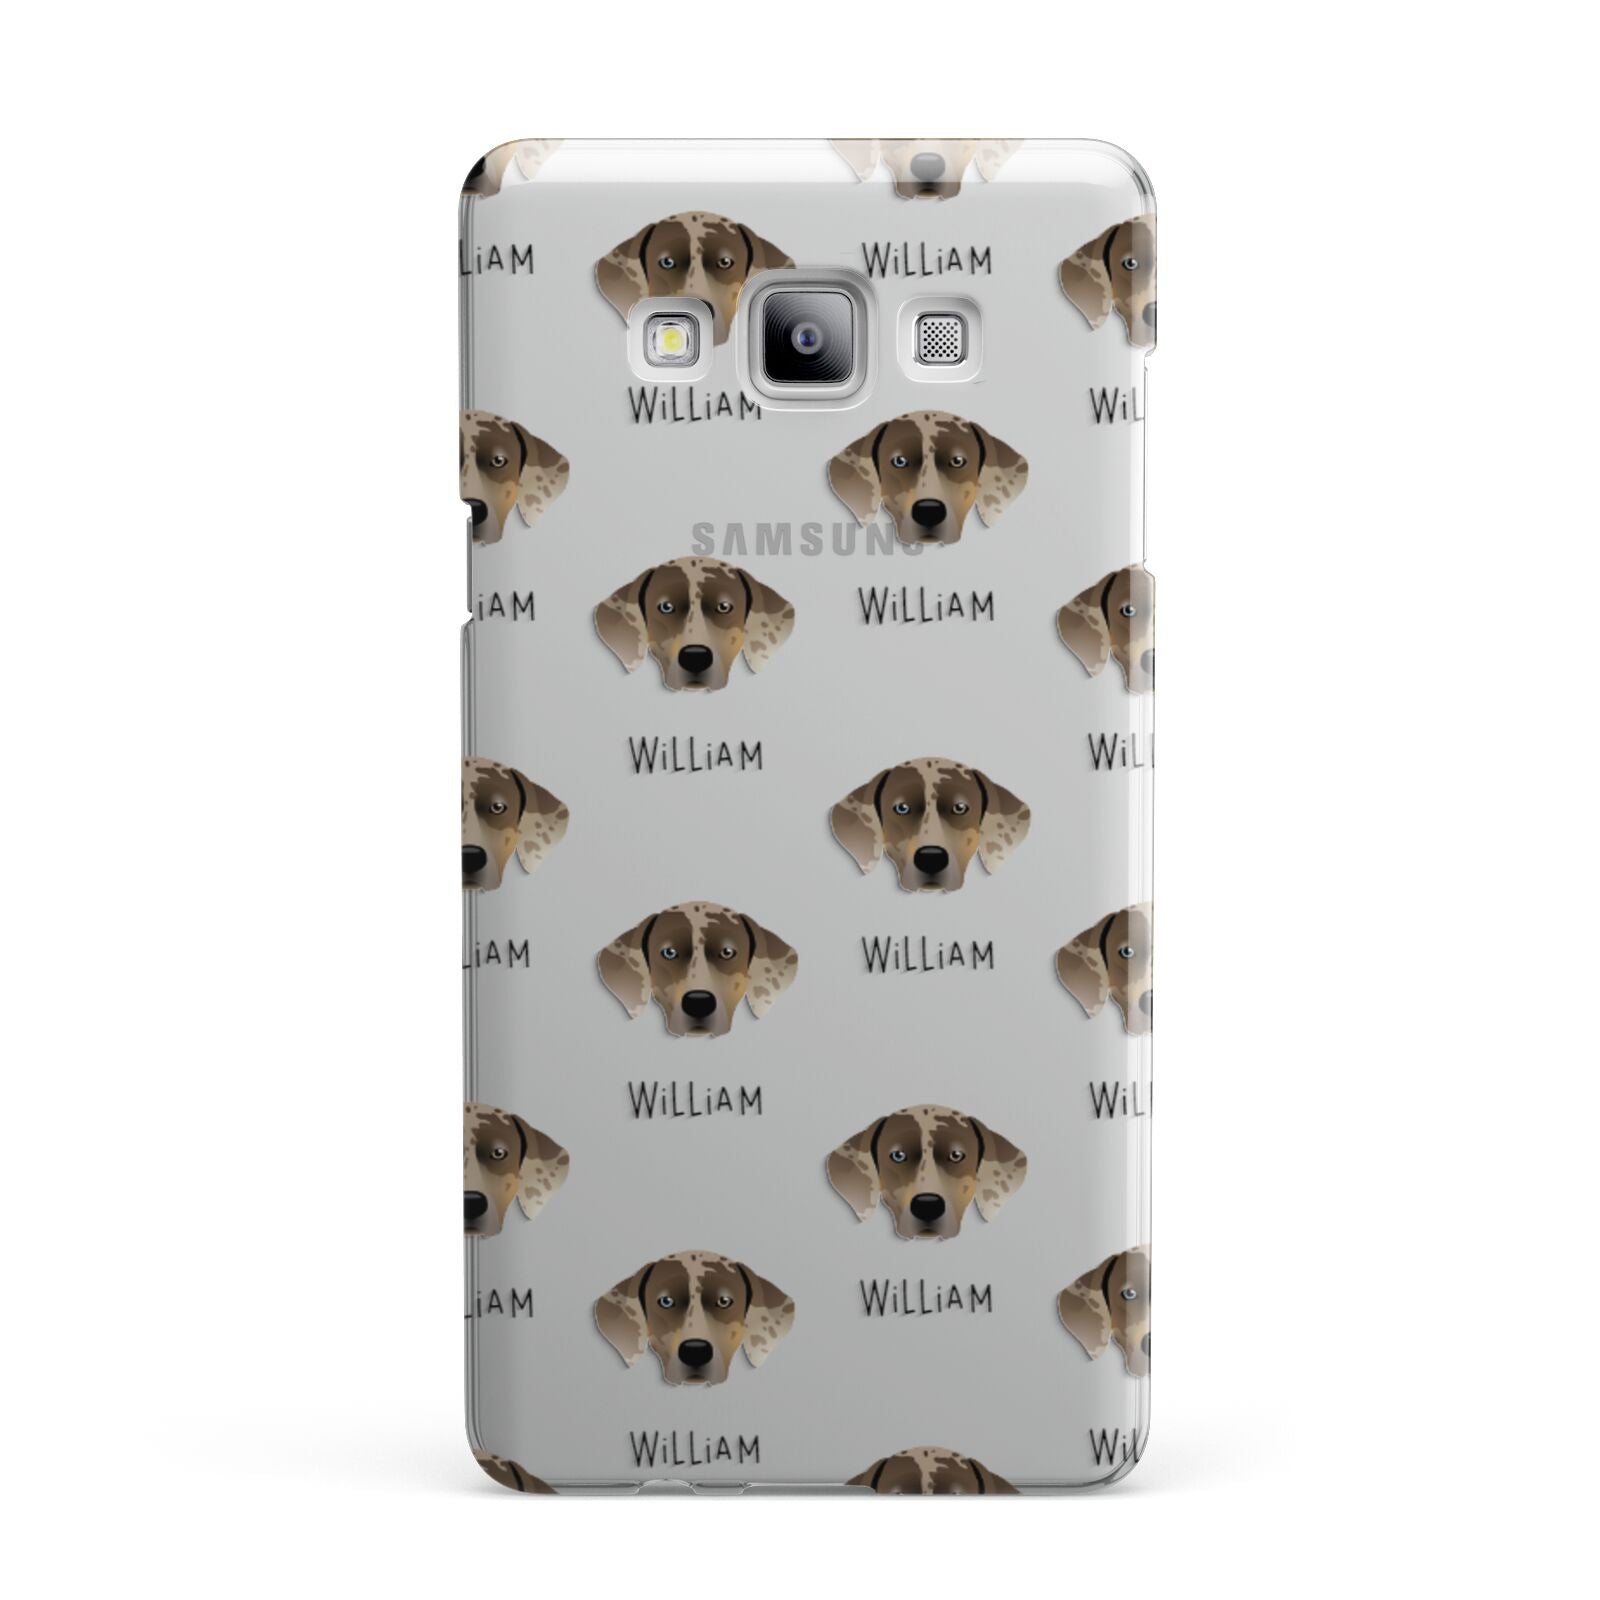 Catahoula Leopard Dog Icon with Name Samsung Galaxy A7 2015 Case